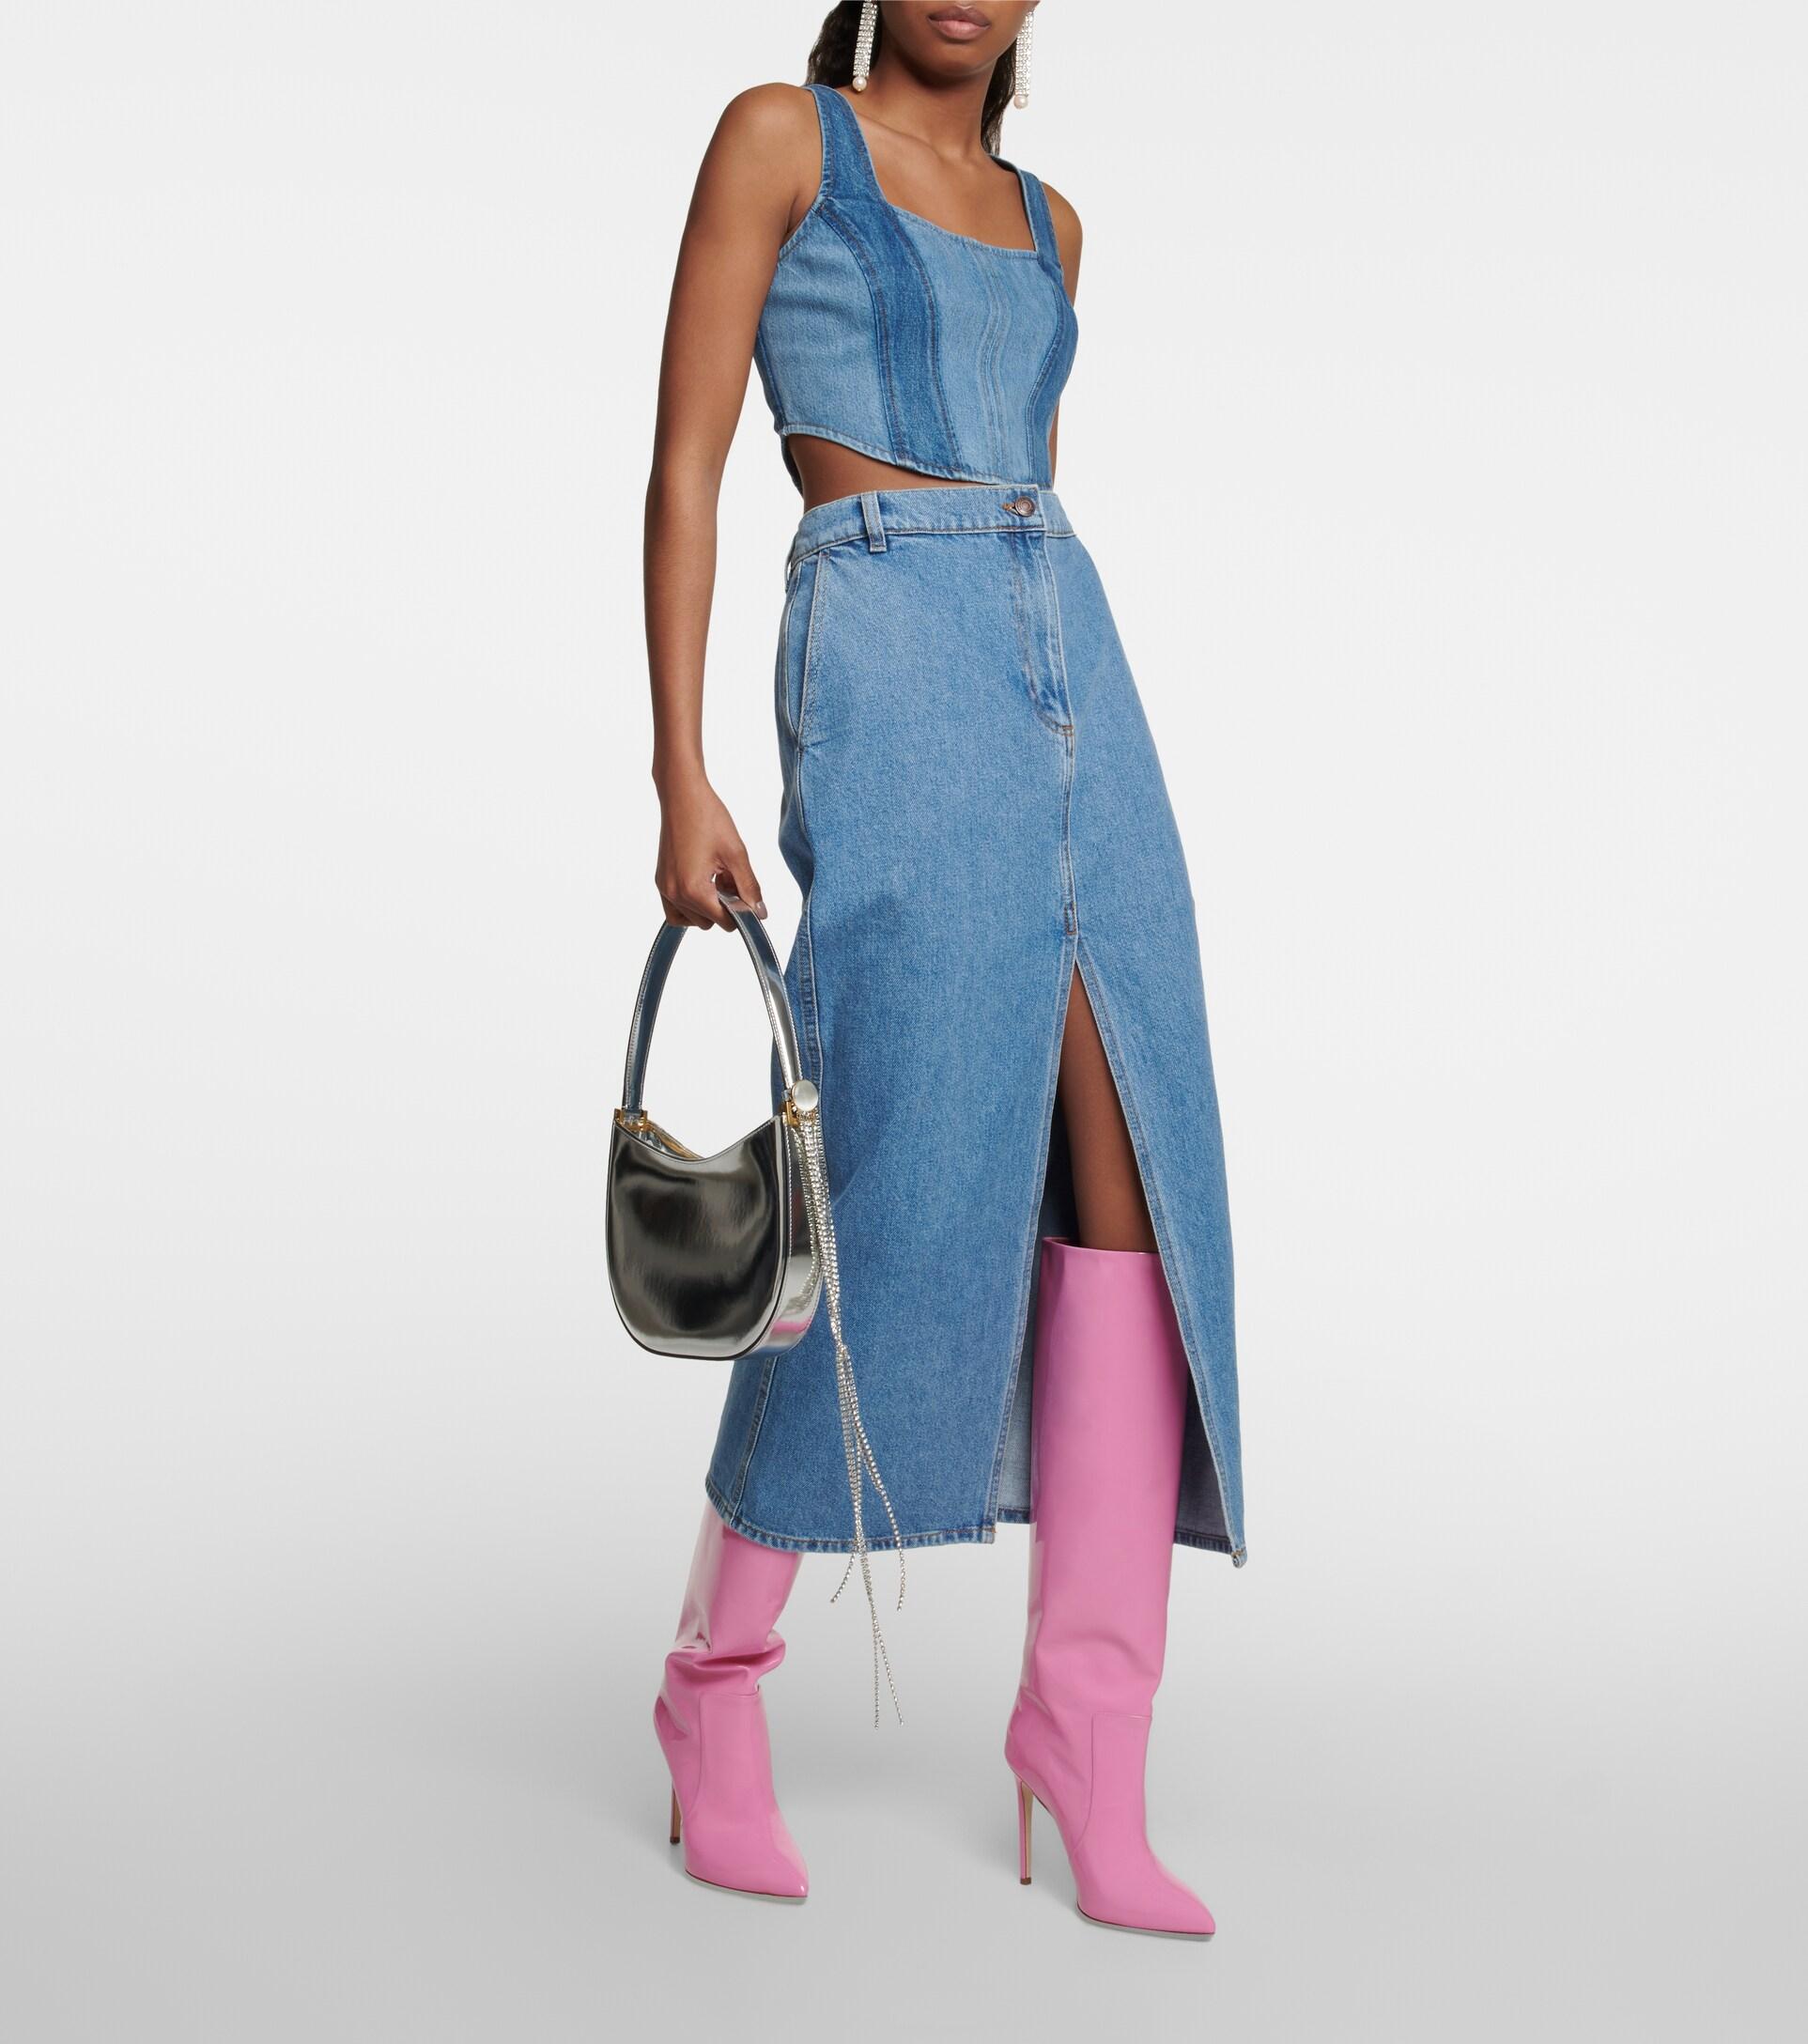 Paris Texas Patent Leather Knee-high Boots in Pink | Lyst